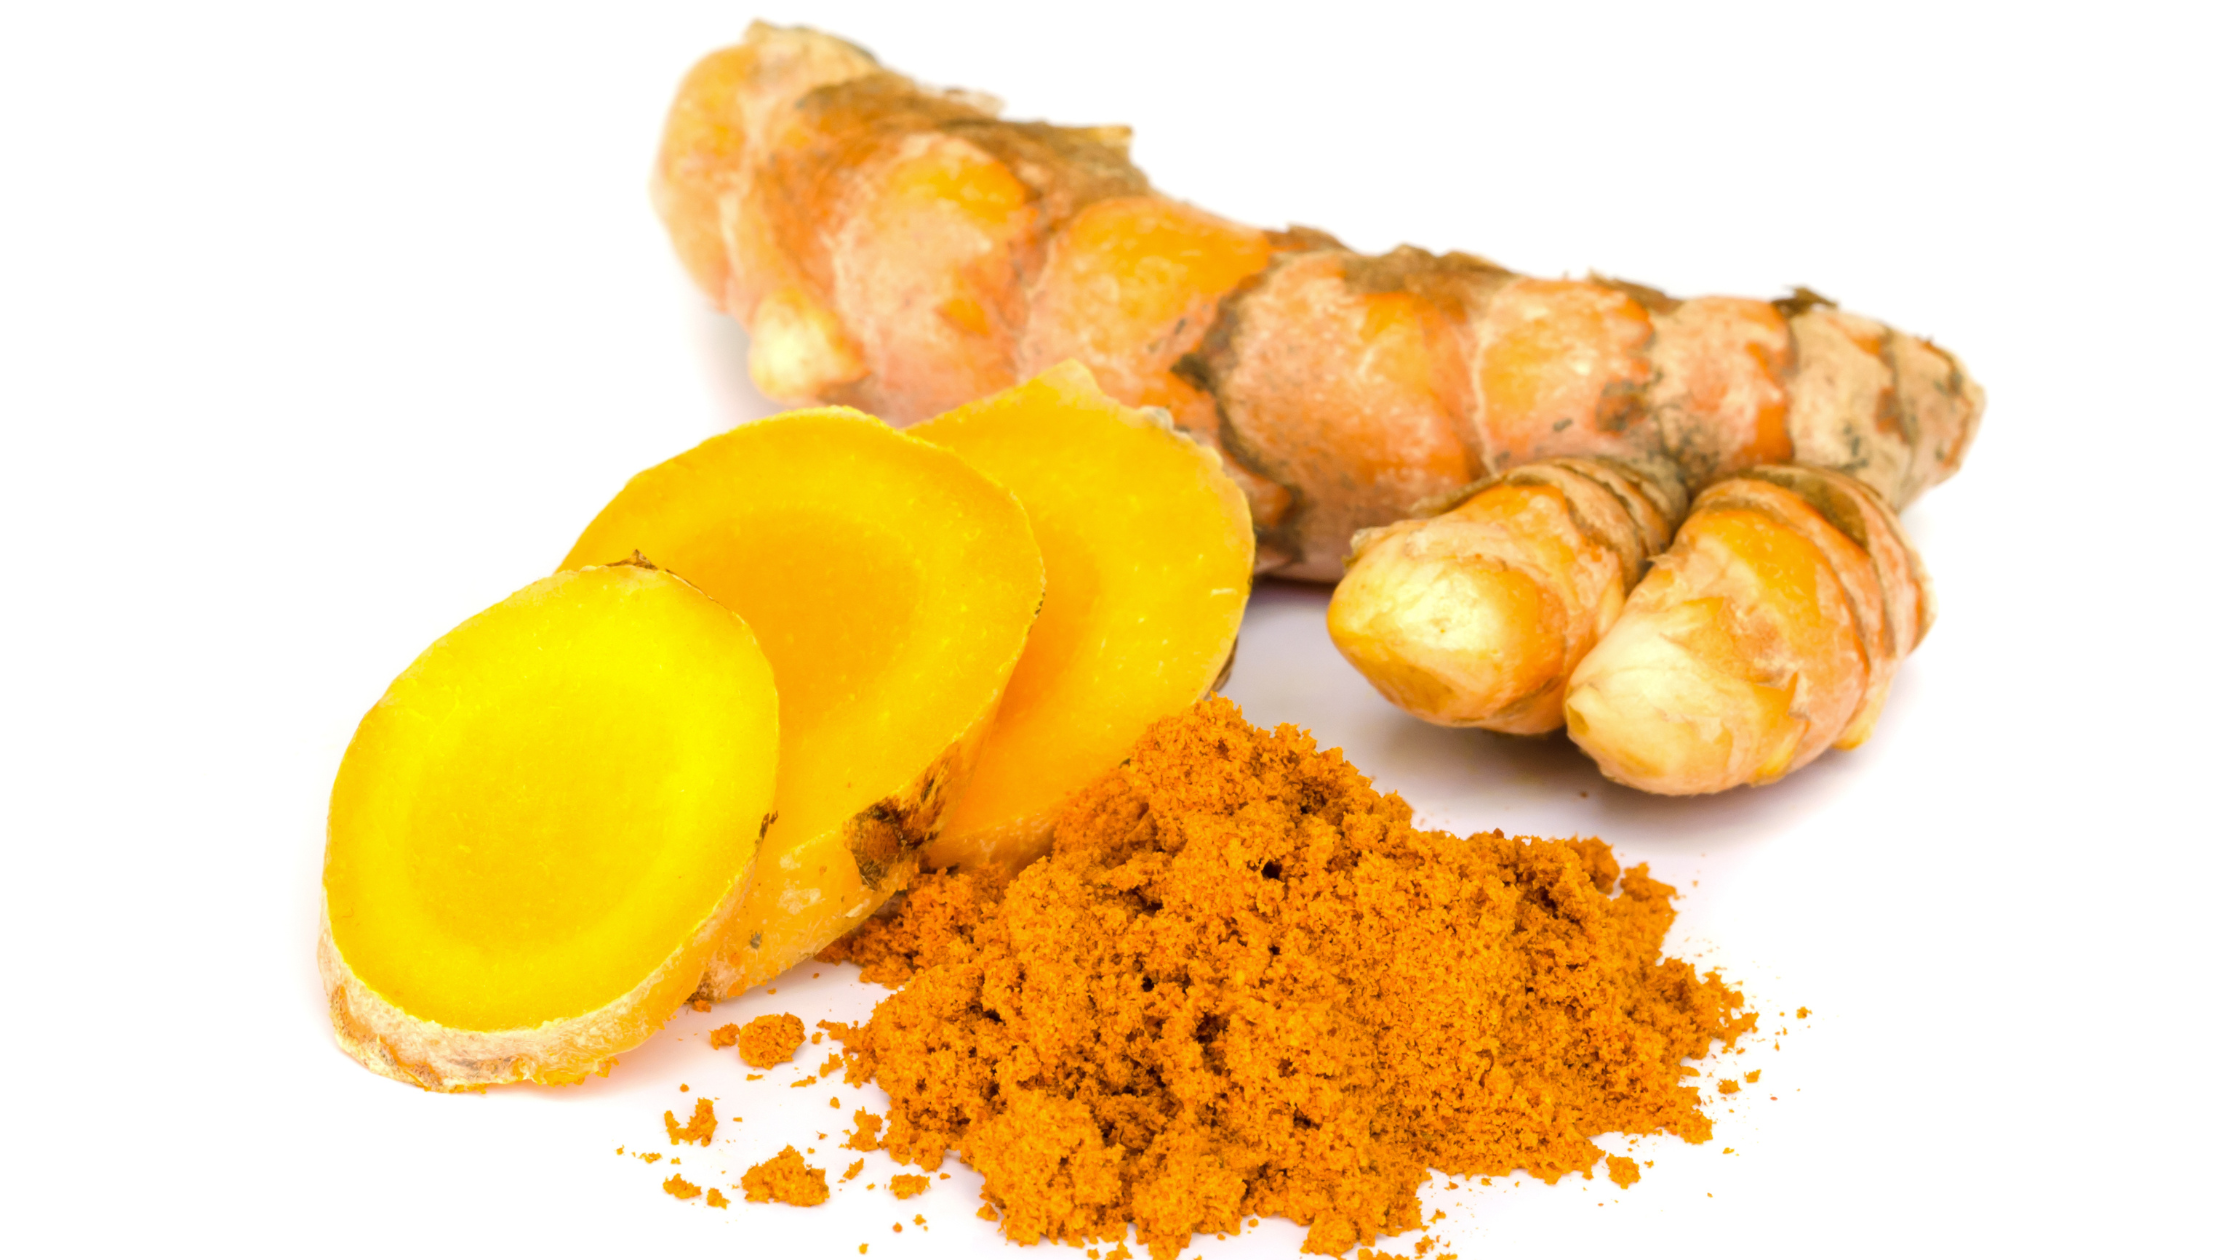 whole, sliced, and ground turmeric root